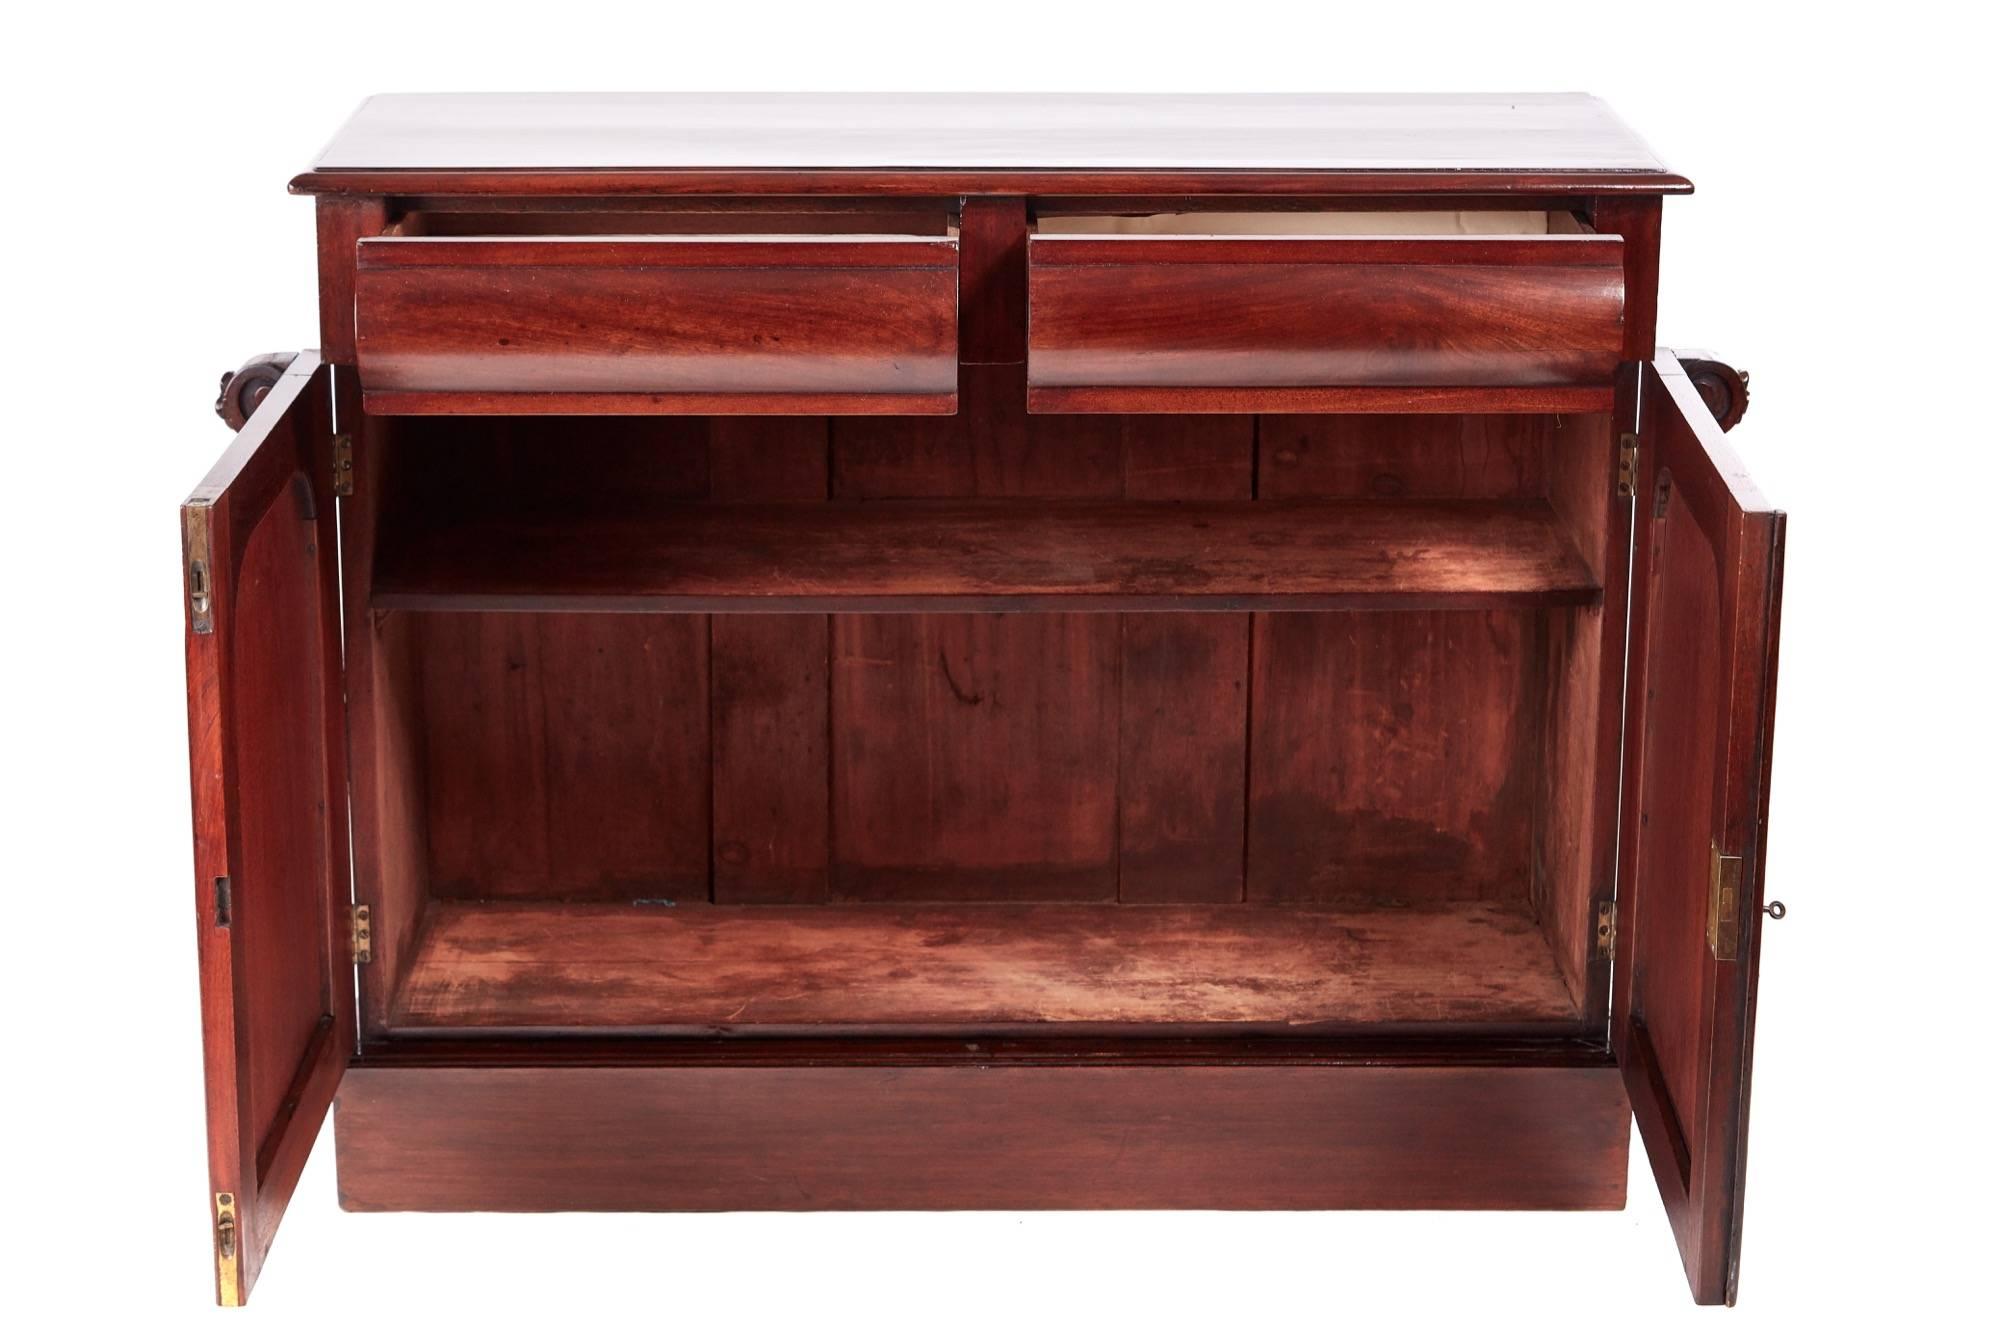 Quality antique Victorian mahogany sideboard, with a lovely mahogany top, two shaped frieze drawers, two flame mahogany doors, lovely carved corbels each side, one shelf interior, standing on a plinth base
Lovely colour and condition.